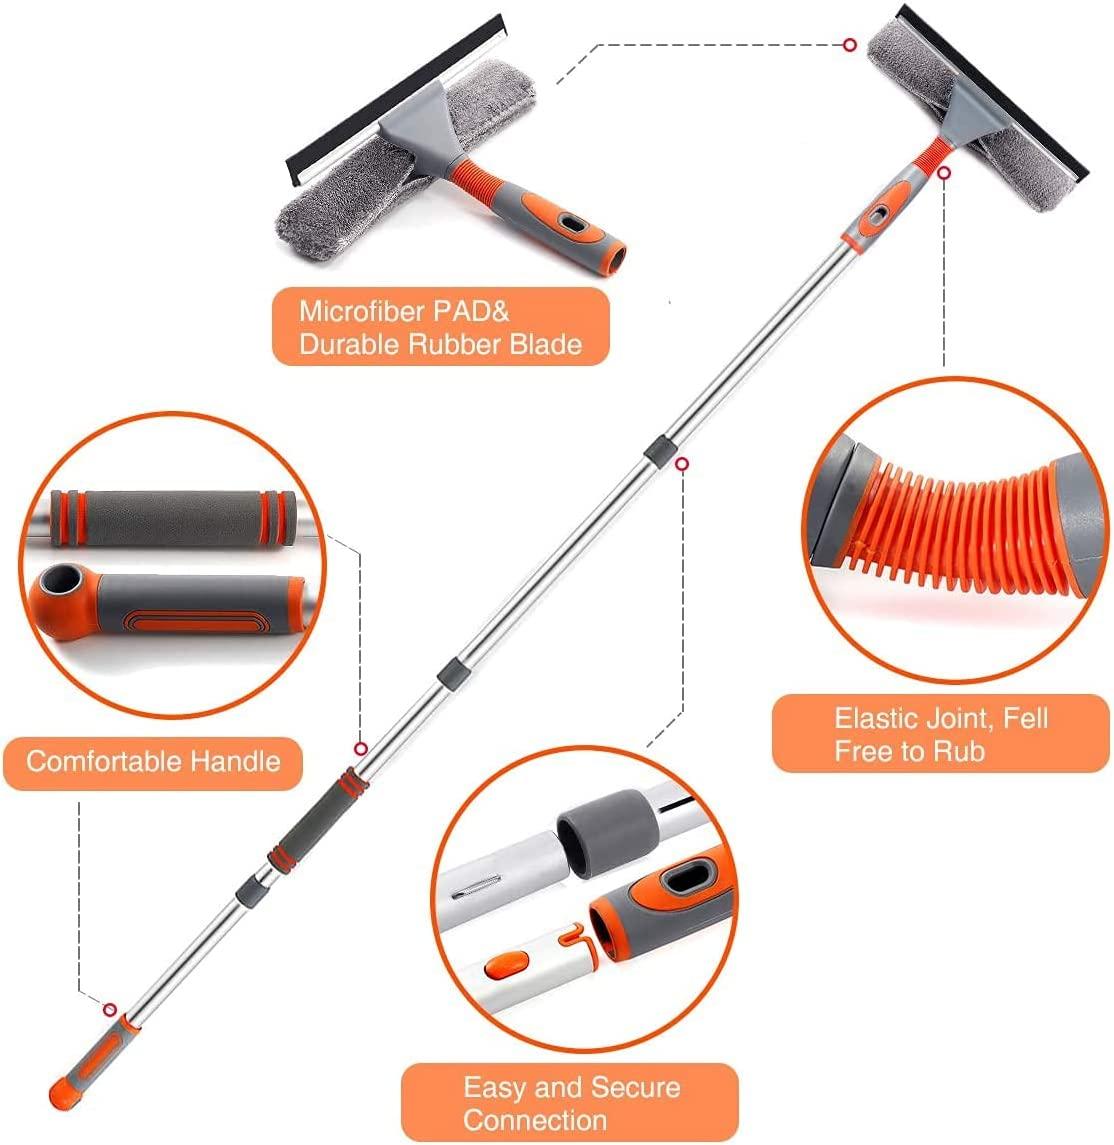 Telescopic Cleaning Poles  Extension Poles for High Access Cleaning